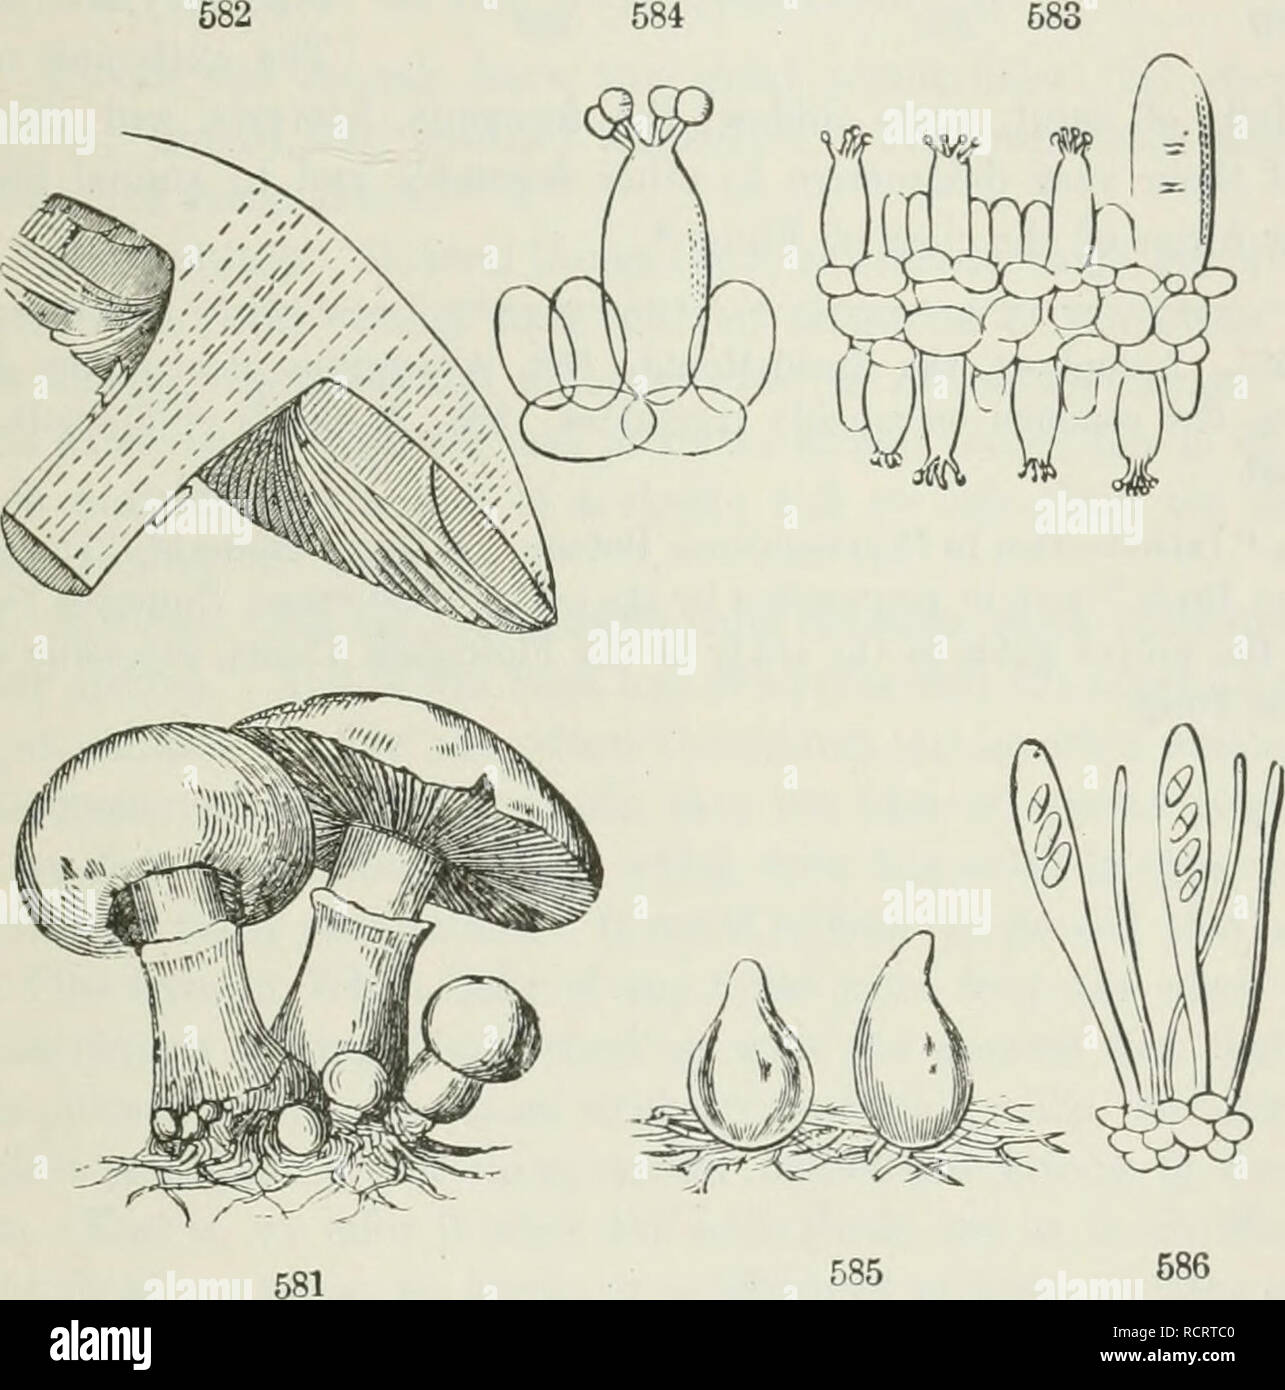 . The elements of botany for beginners and for schools. Botany. SECTION 17.] THALLOPHYTES. 173 cells lengthen and branch, growing by the absorption through their whole surface ot&quot; the decaying, or orgunizable, or living matter wiiieh they feed upon. In a Mushroom (Agaricus), a kuol)by mass is at length formed, which develops into a stout stalk (Sl/'pr), bearing tlie cap {PUeus) : tlie under side of tlic cap is covered by the Ih/nienium, in this genus consisting of radiating plates, tlie gills or LamelLe; and these bear the powdery spores in immense numbers. Under the microscope, the gills Stock Photo